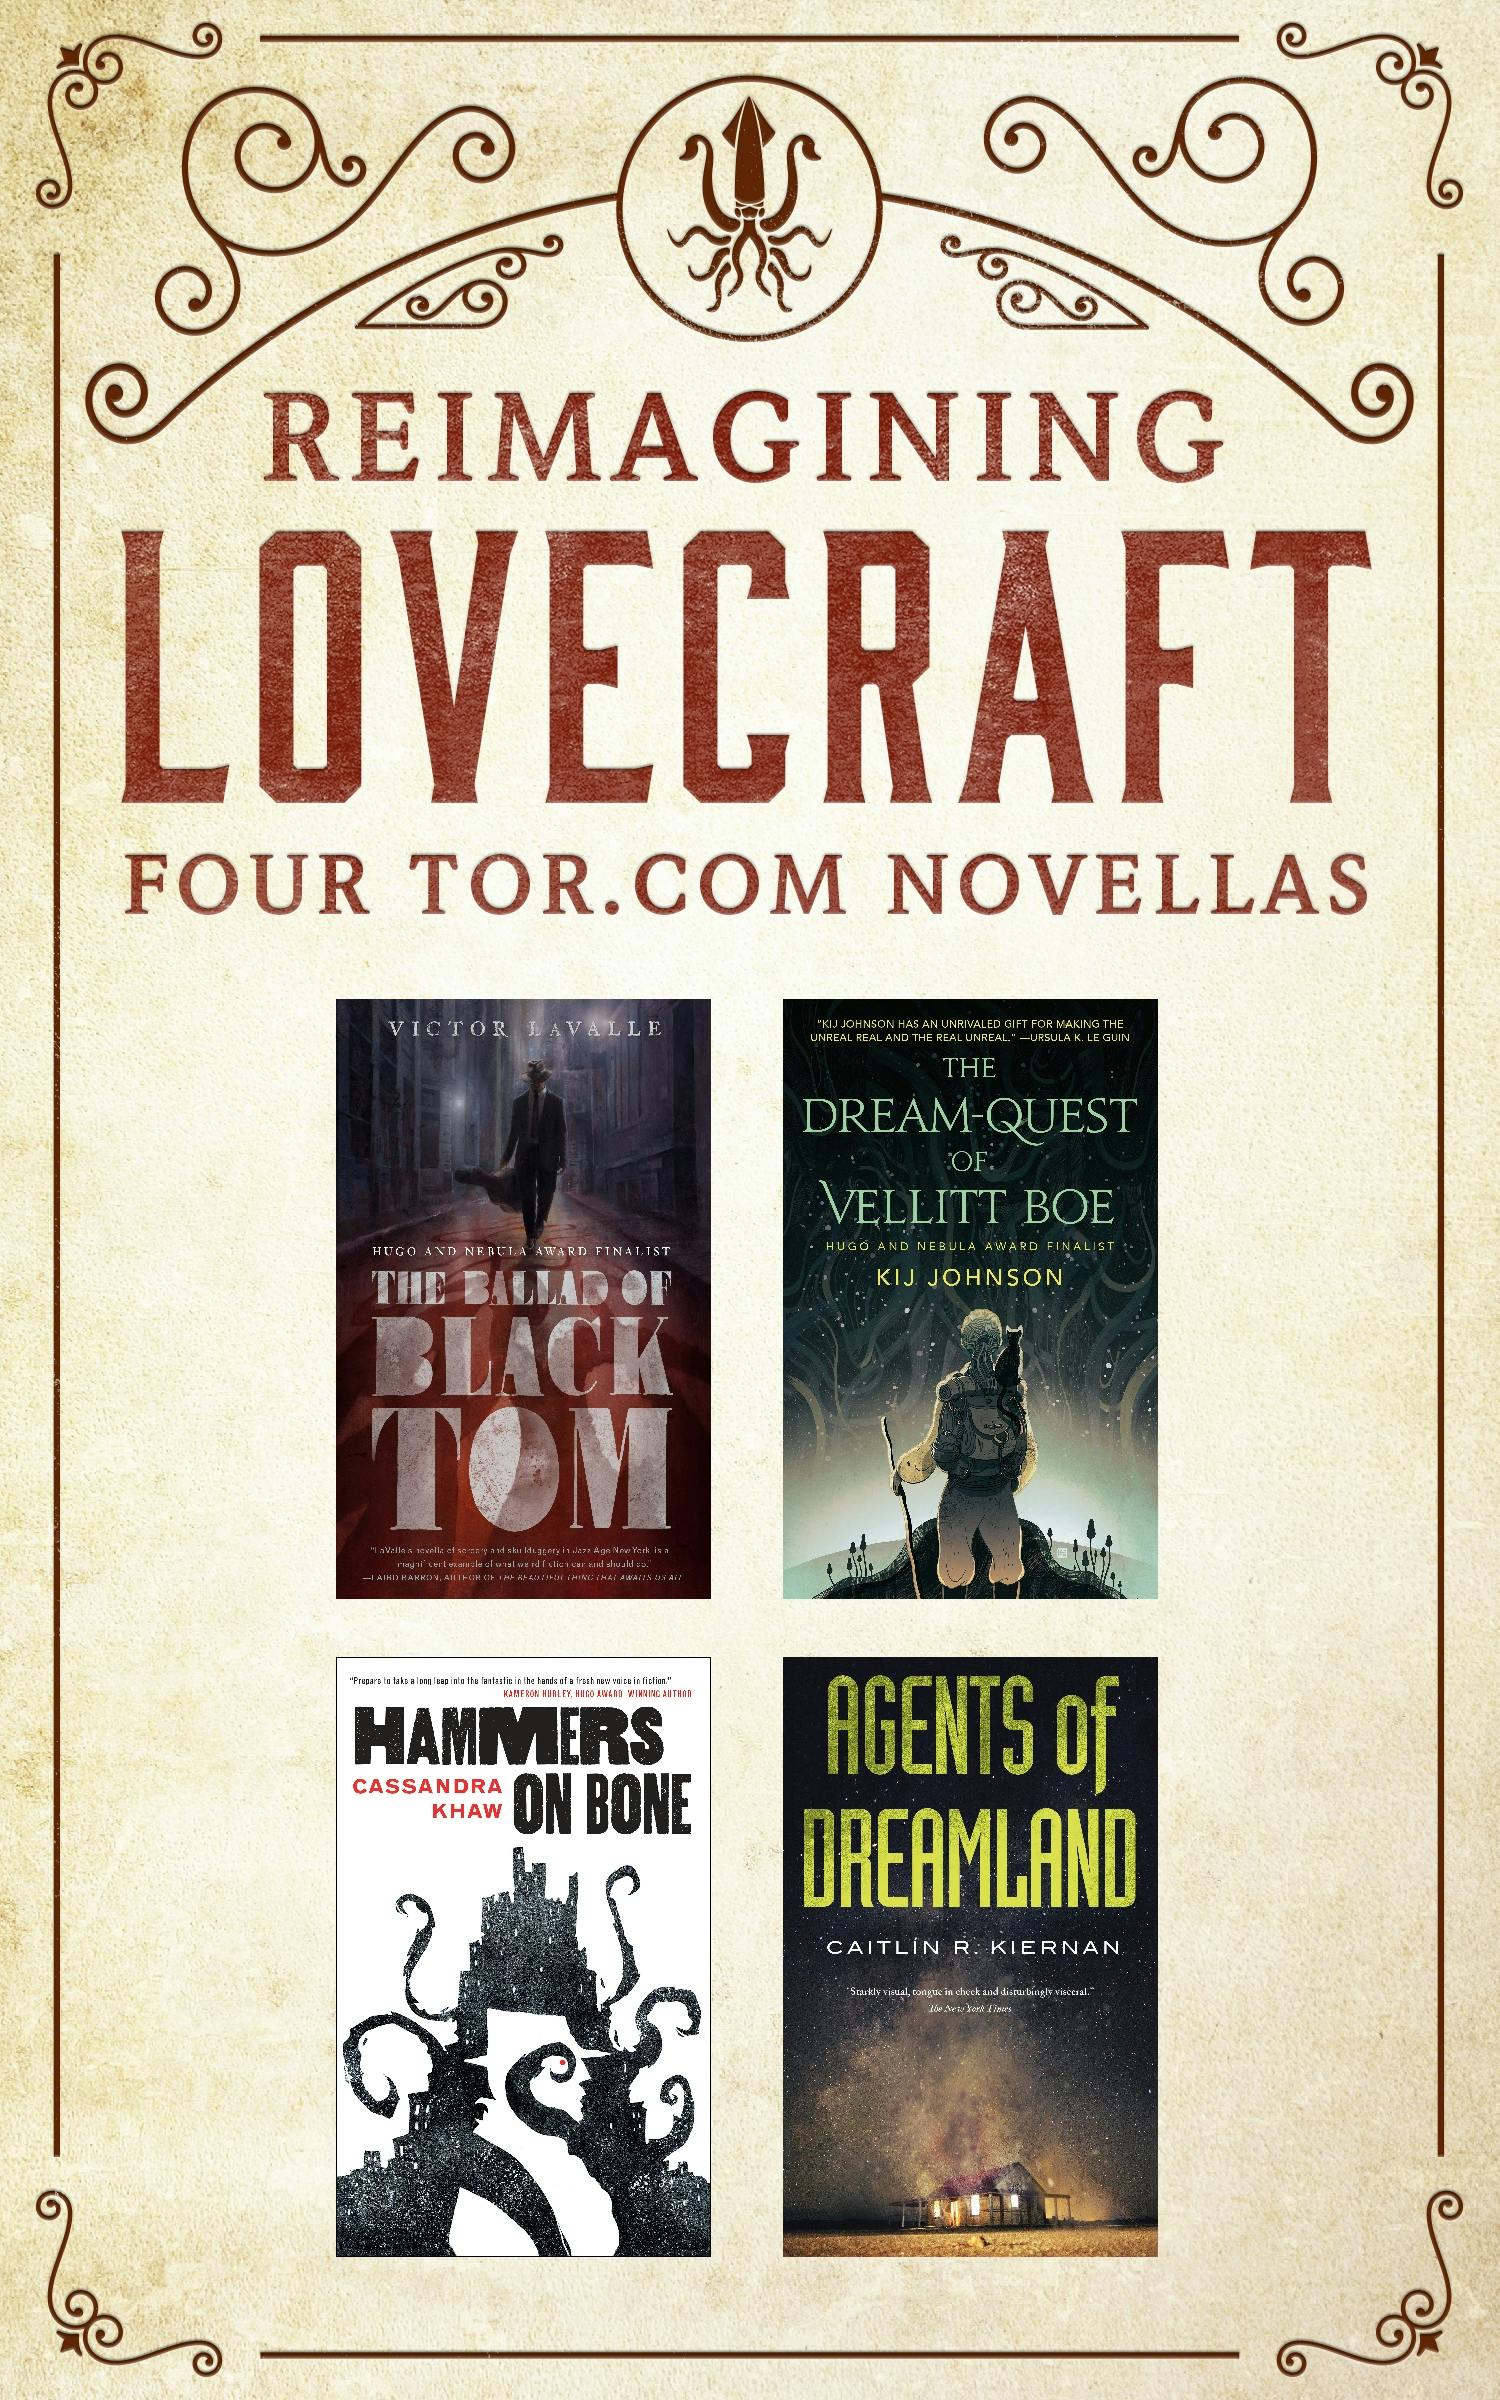 Cover for the book titled as: Reimagining Lovecraft: Four Tor.com Novellas